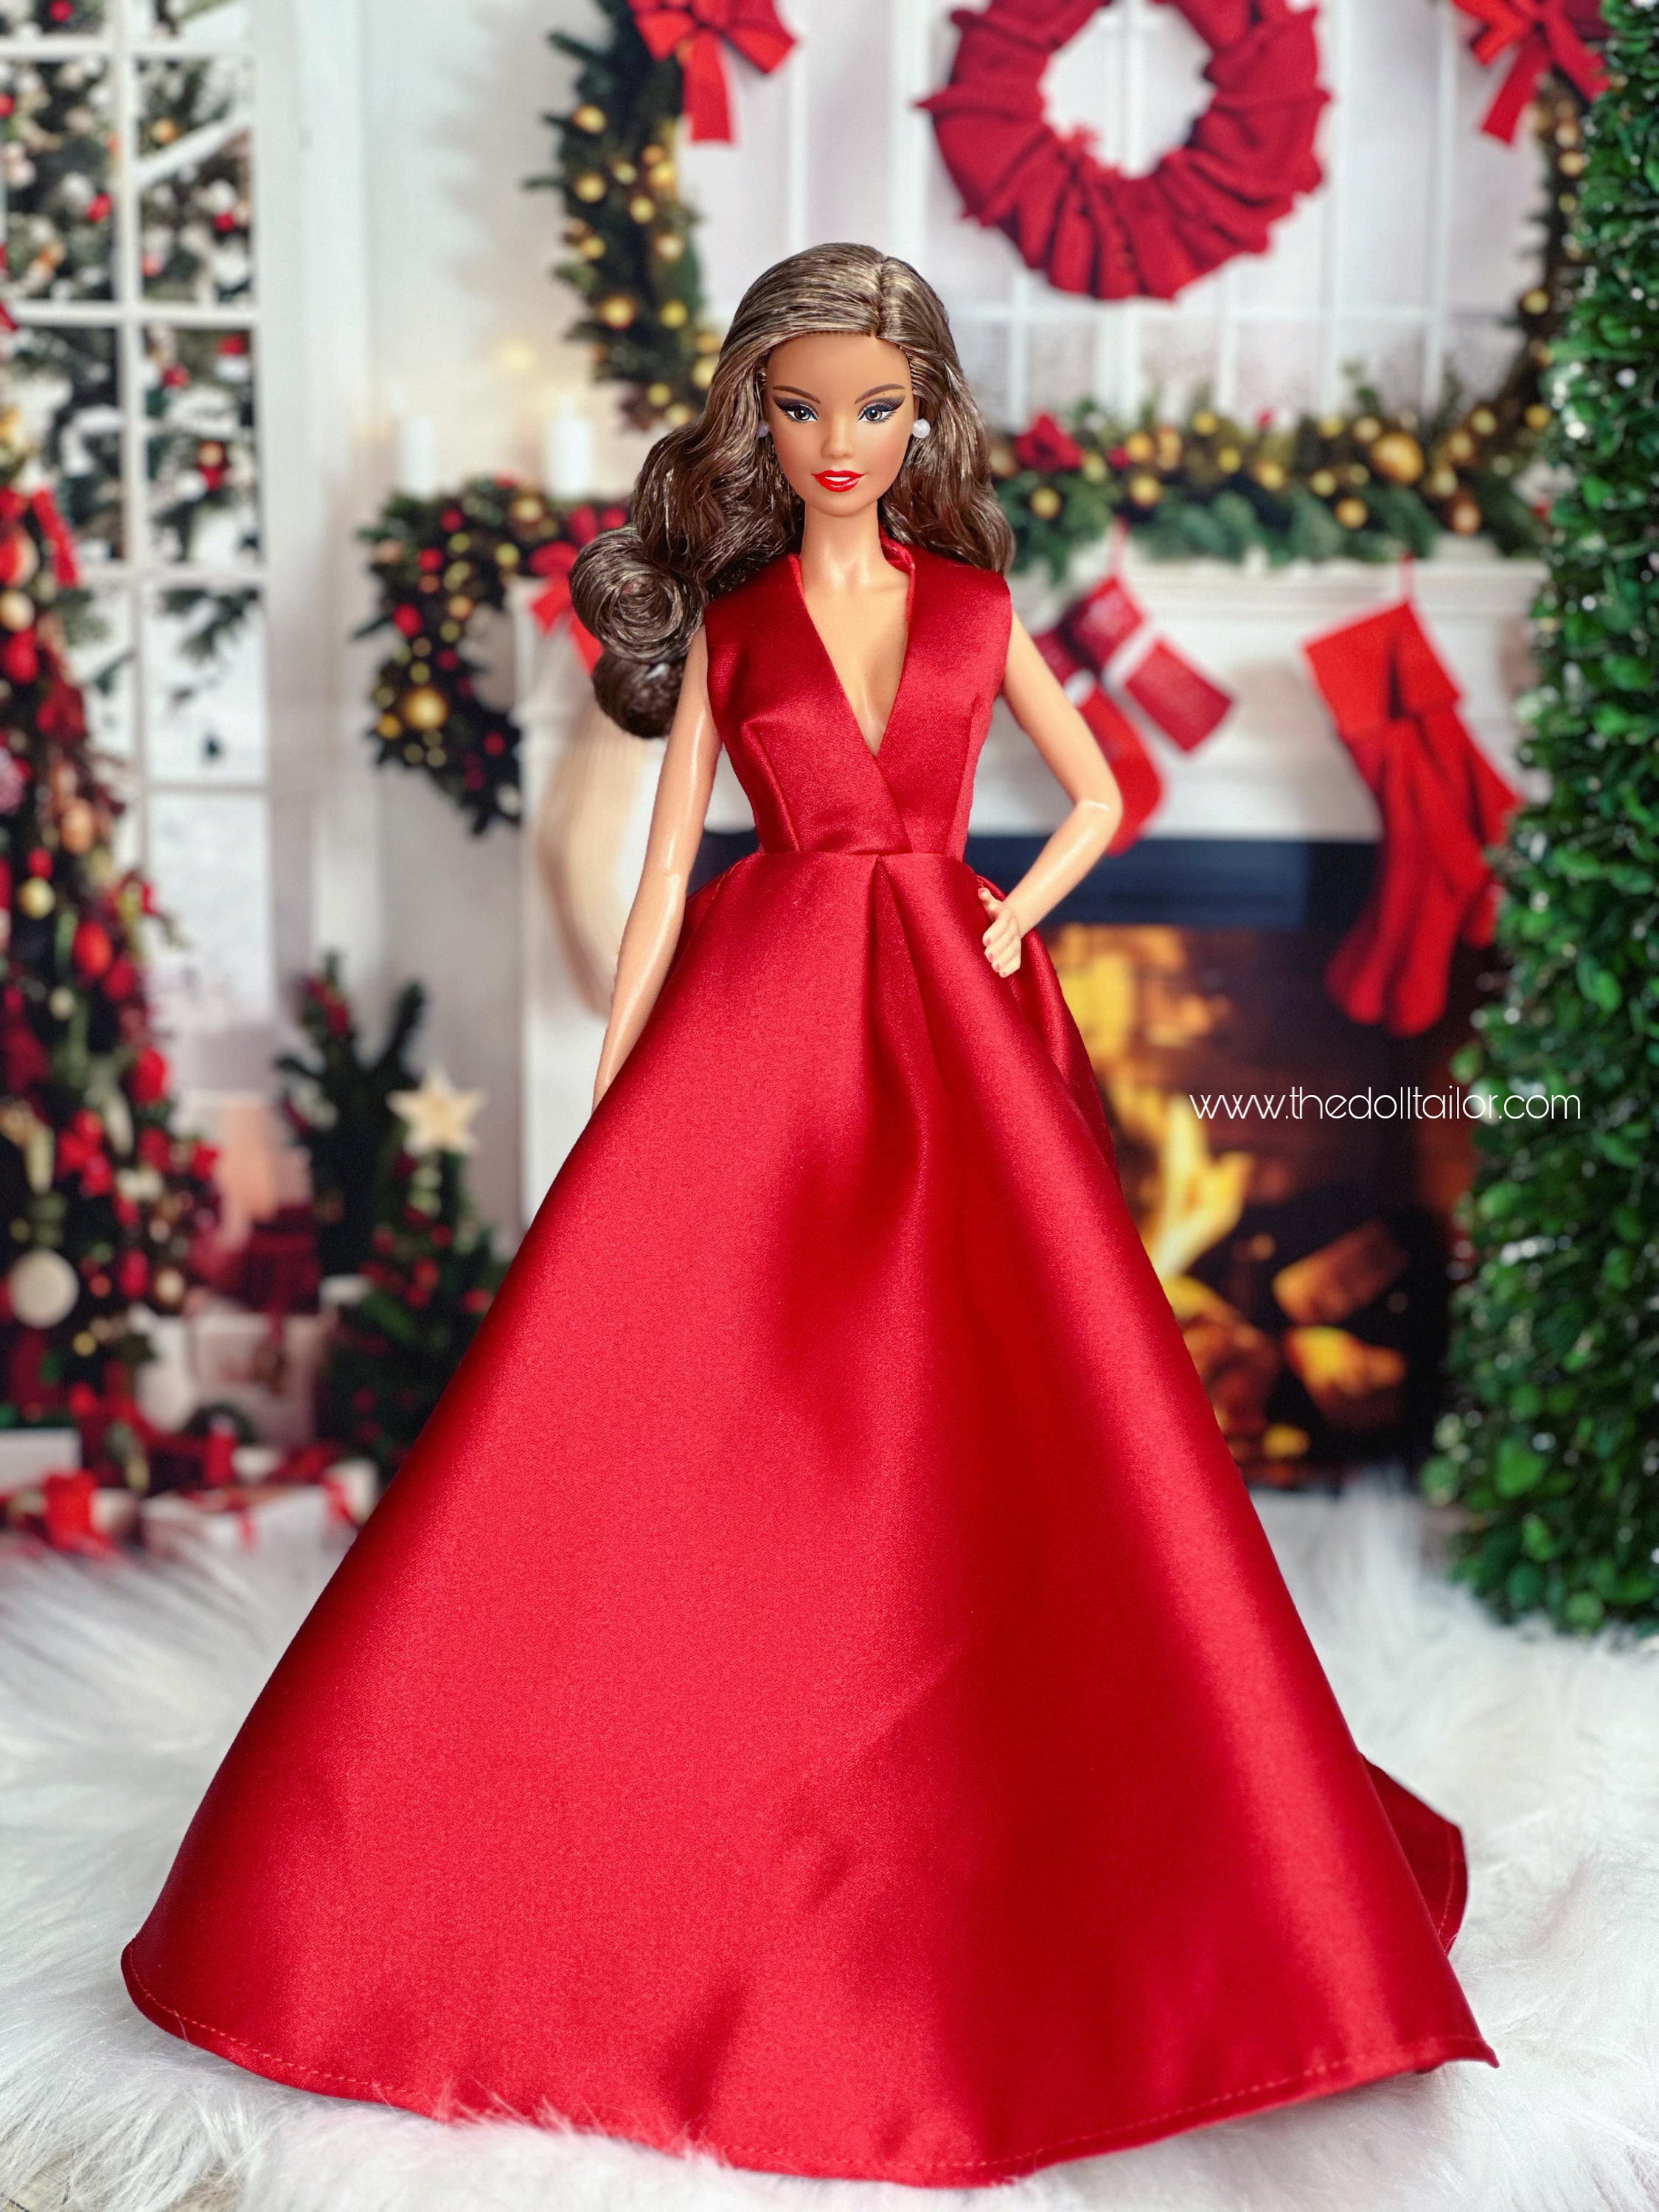 Elegant Barbie Doll in Red Gown Girl Room Decor Gift Barbie Doll Collection  - Etsy